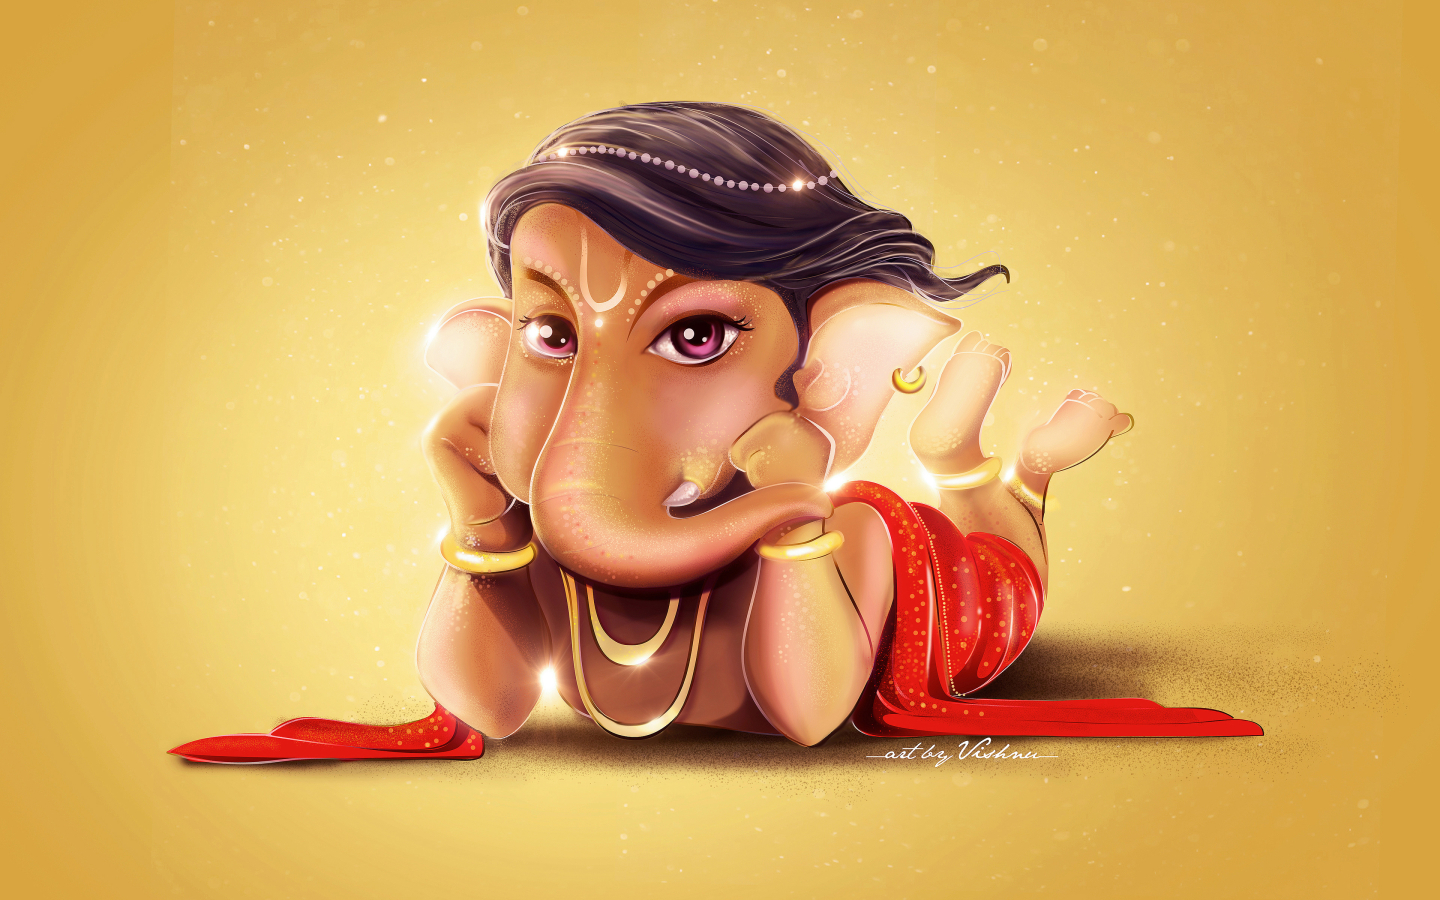 1080p Images: High Resolution Lord Ganesha Hd Wallpapers 1080p For Mobile